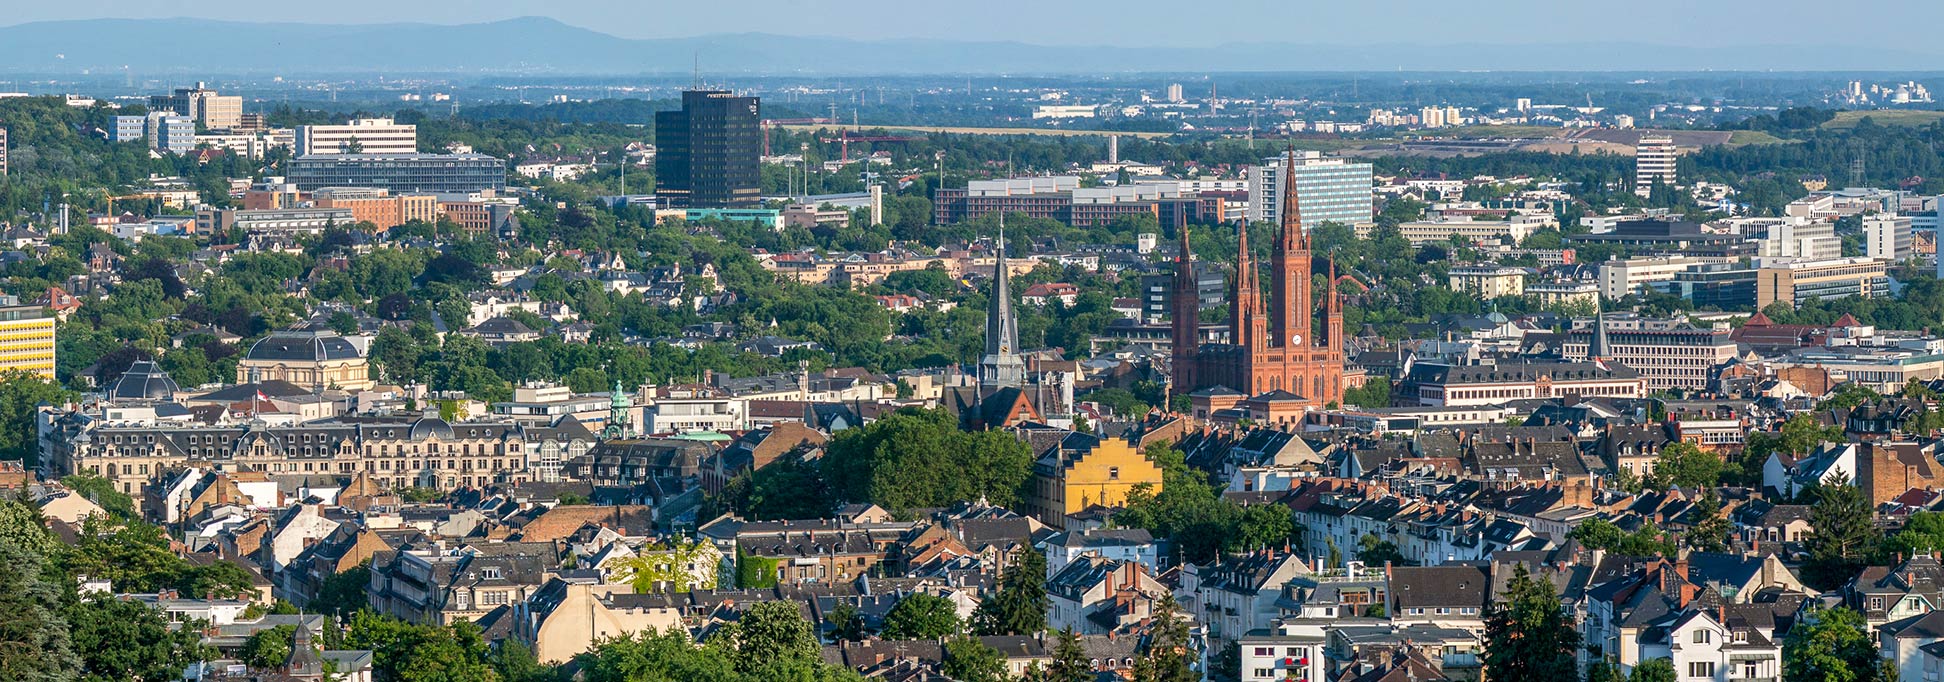 View of Wiesbaden and Marktkirche from Neroberg